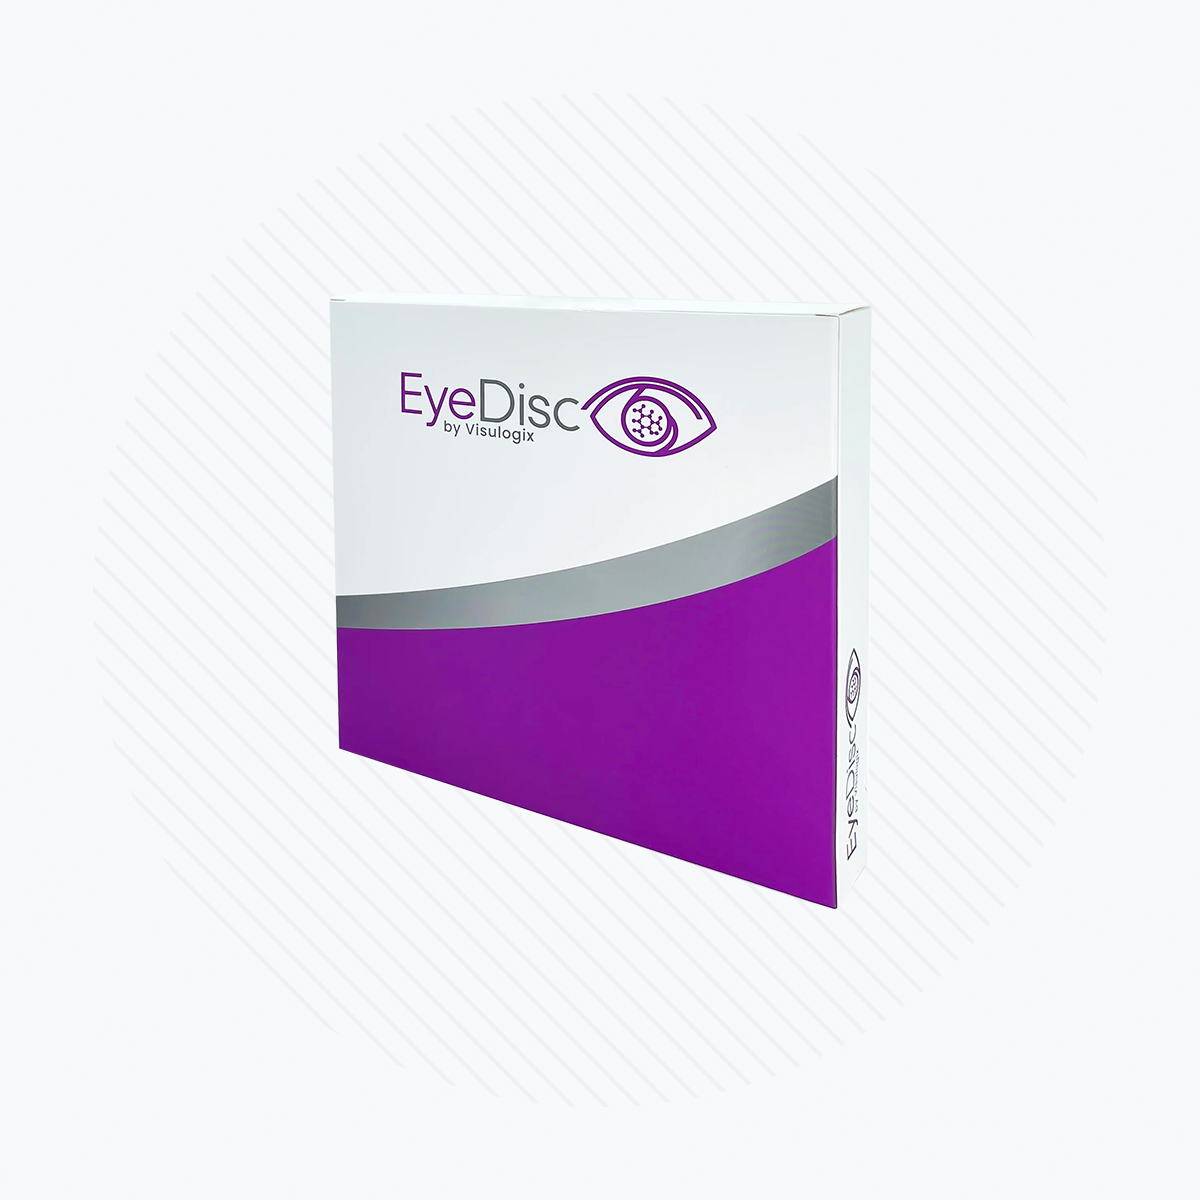 Eye Disc Amniotic Dehydrated, Bi-directional, Membrane by Visulogix (Multiple Sizes)